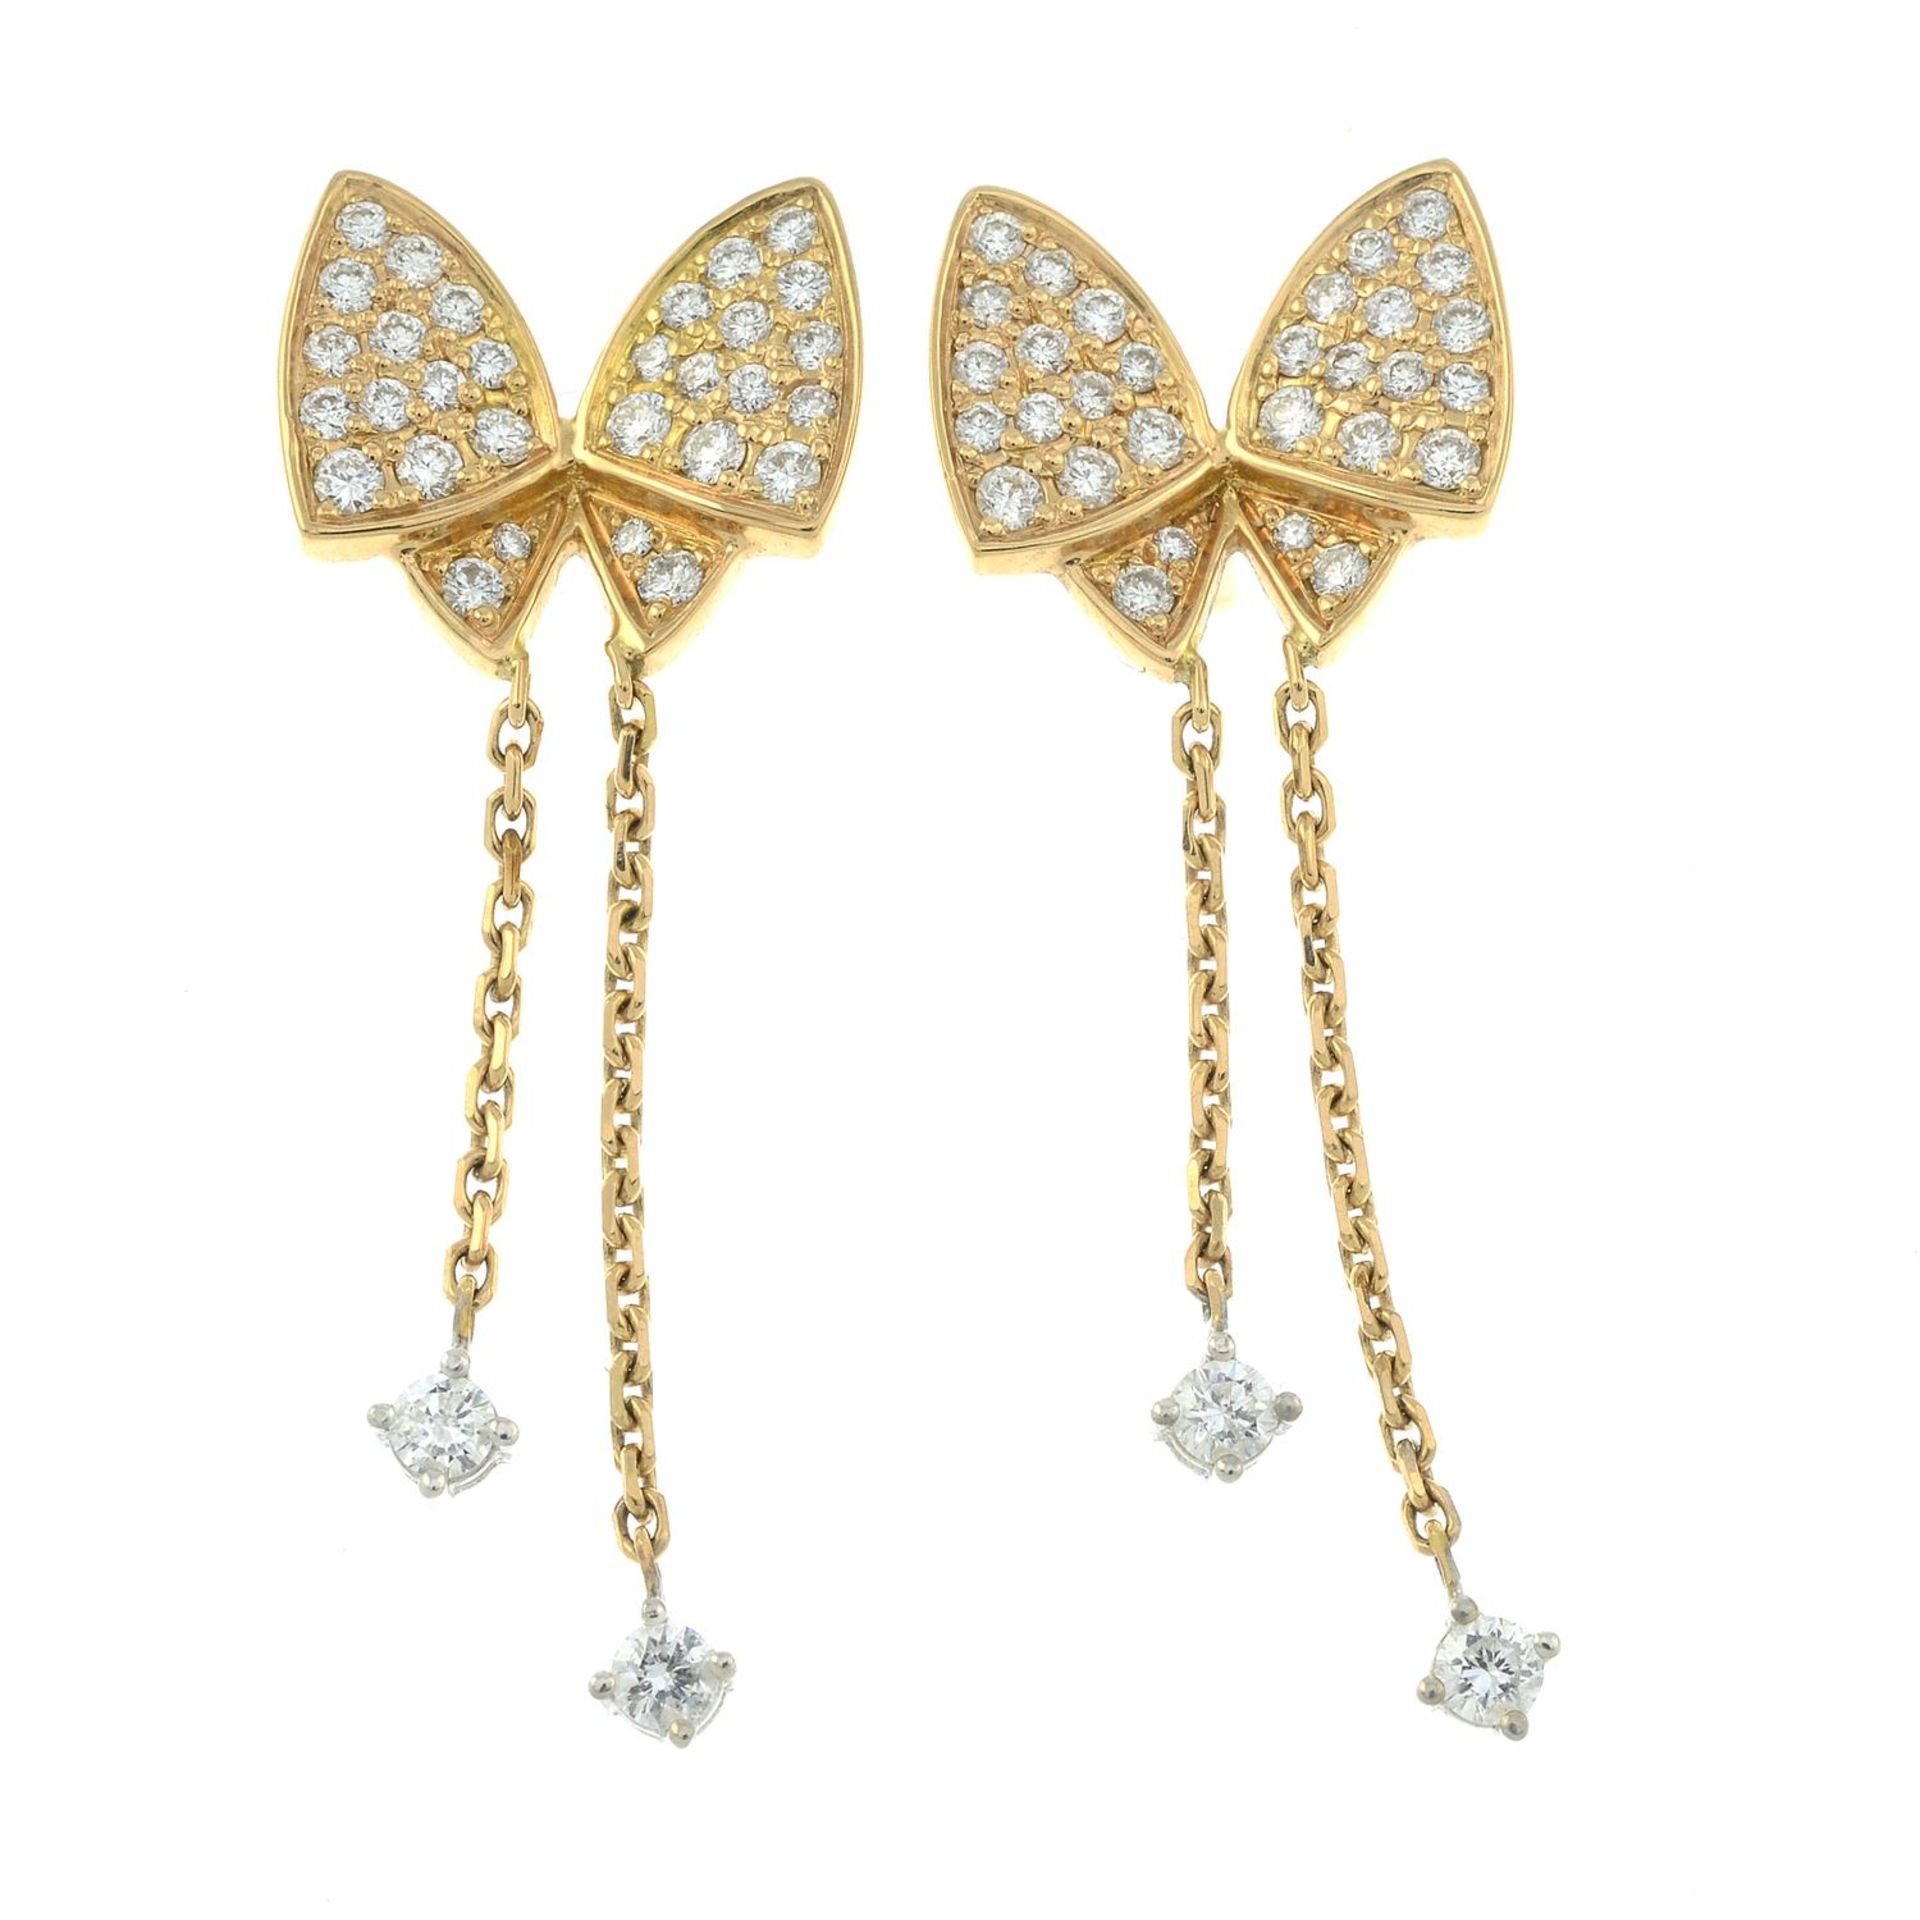 A pair of 18ct gold diamond earrings, designed as butterflies. - Image 2 of 3